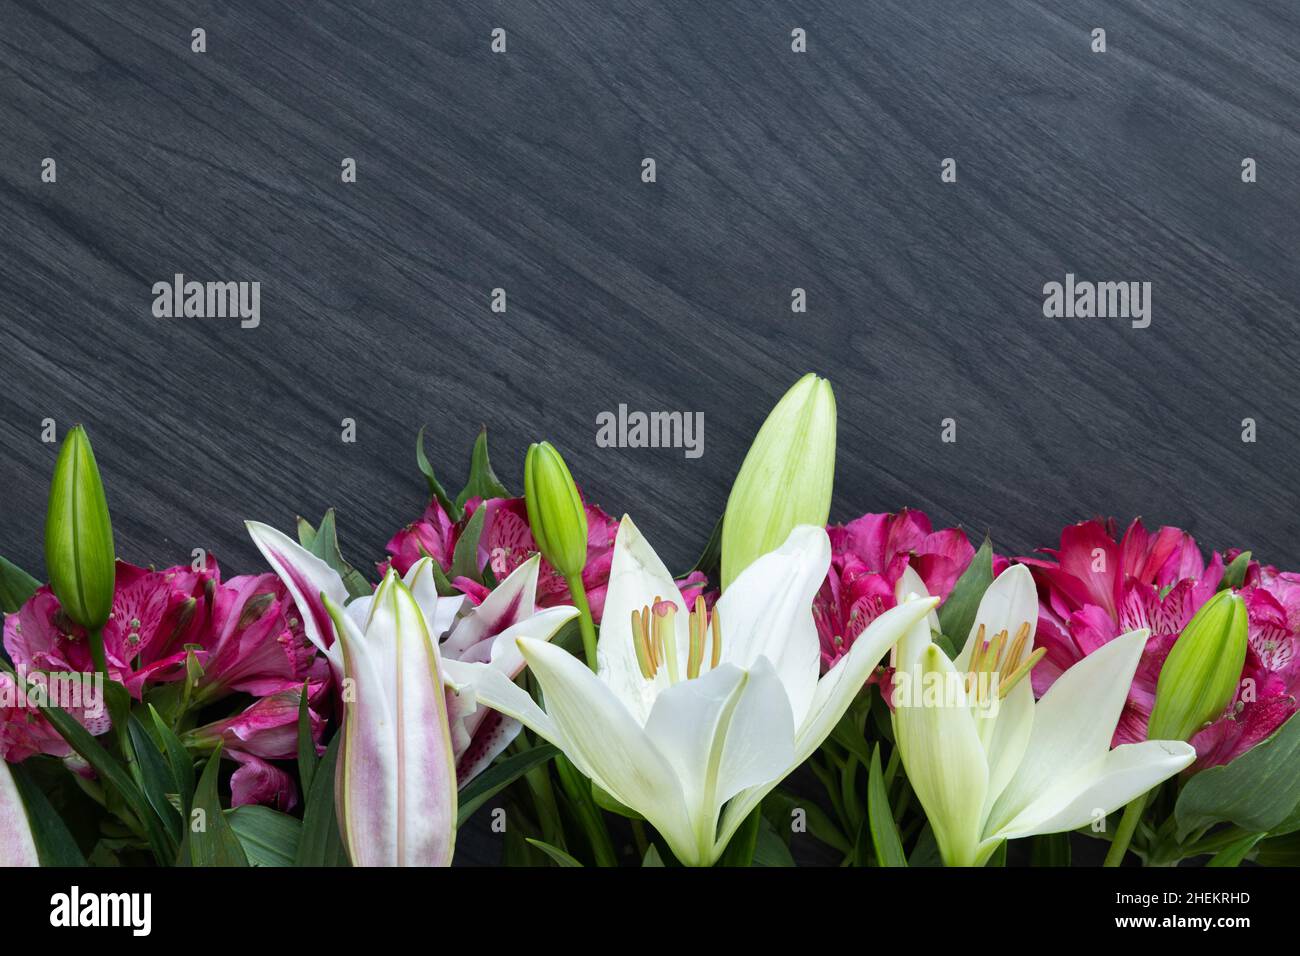 Spring flower border of vibrant pink alstroemeria flowers and white and asiatic lily flowers on a dark wood background with copy space Stock Photo